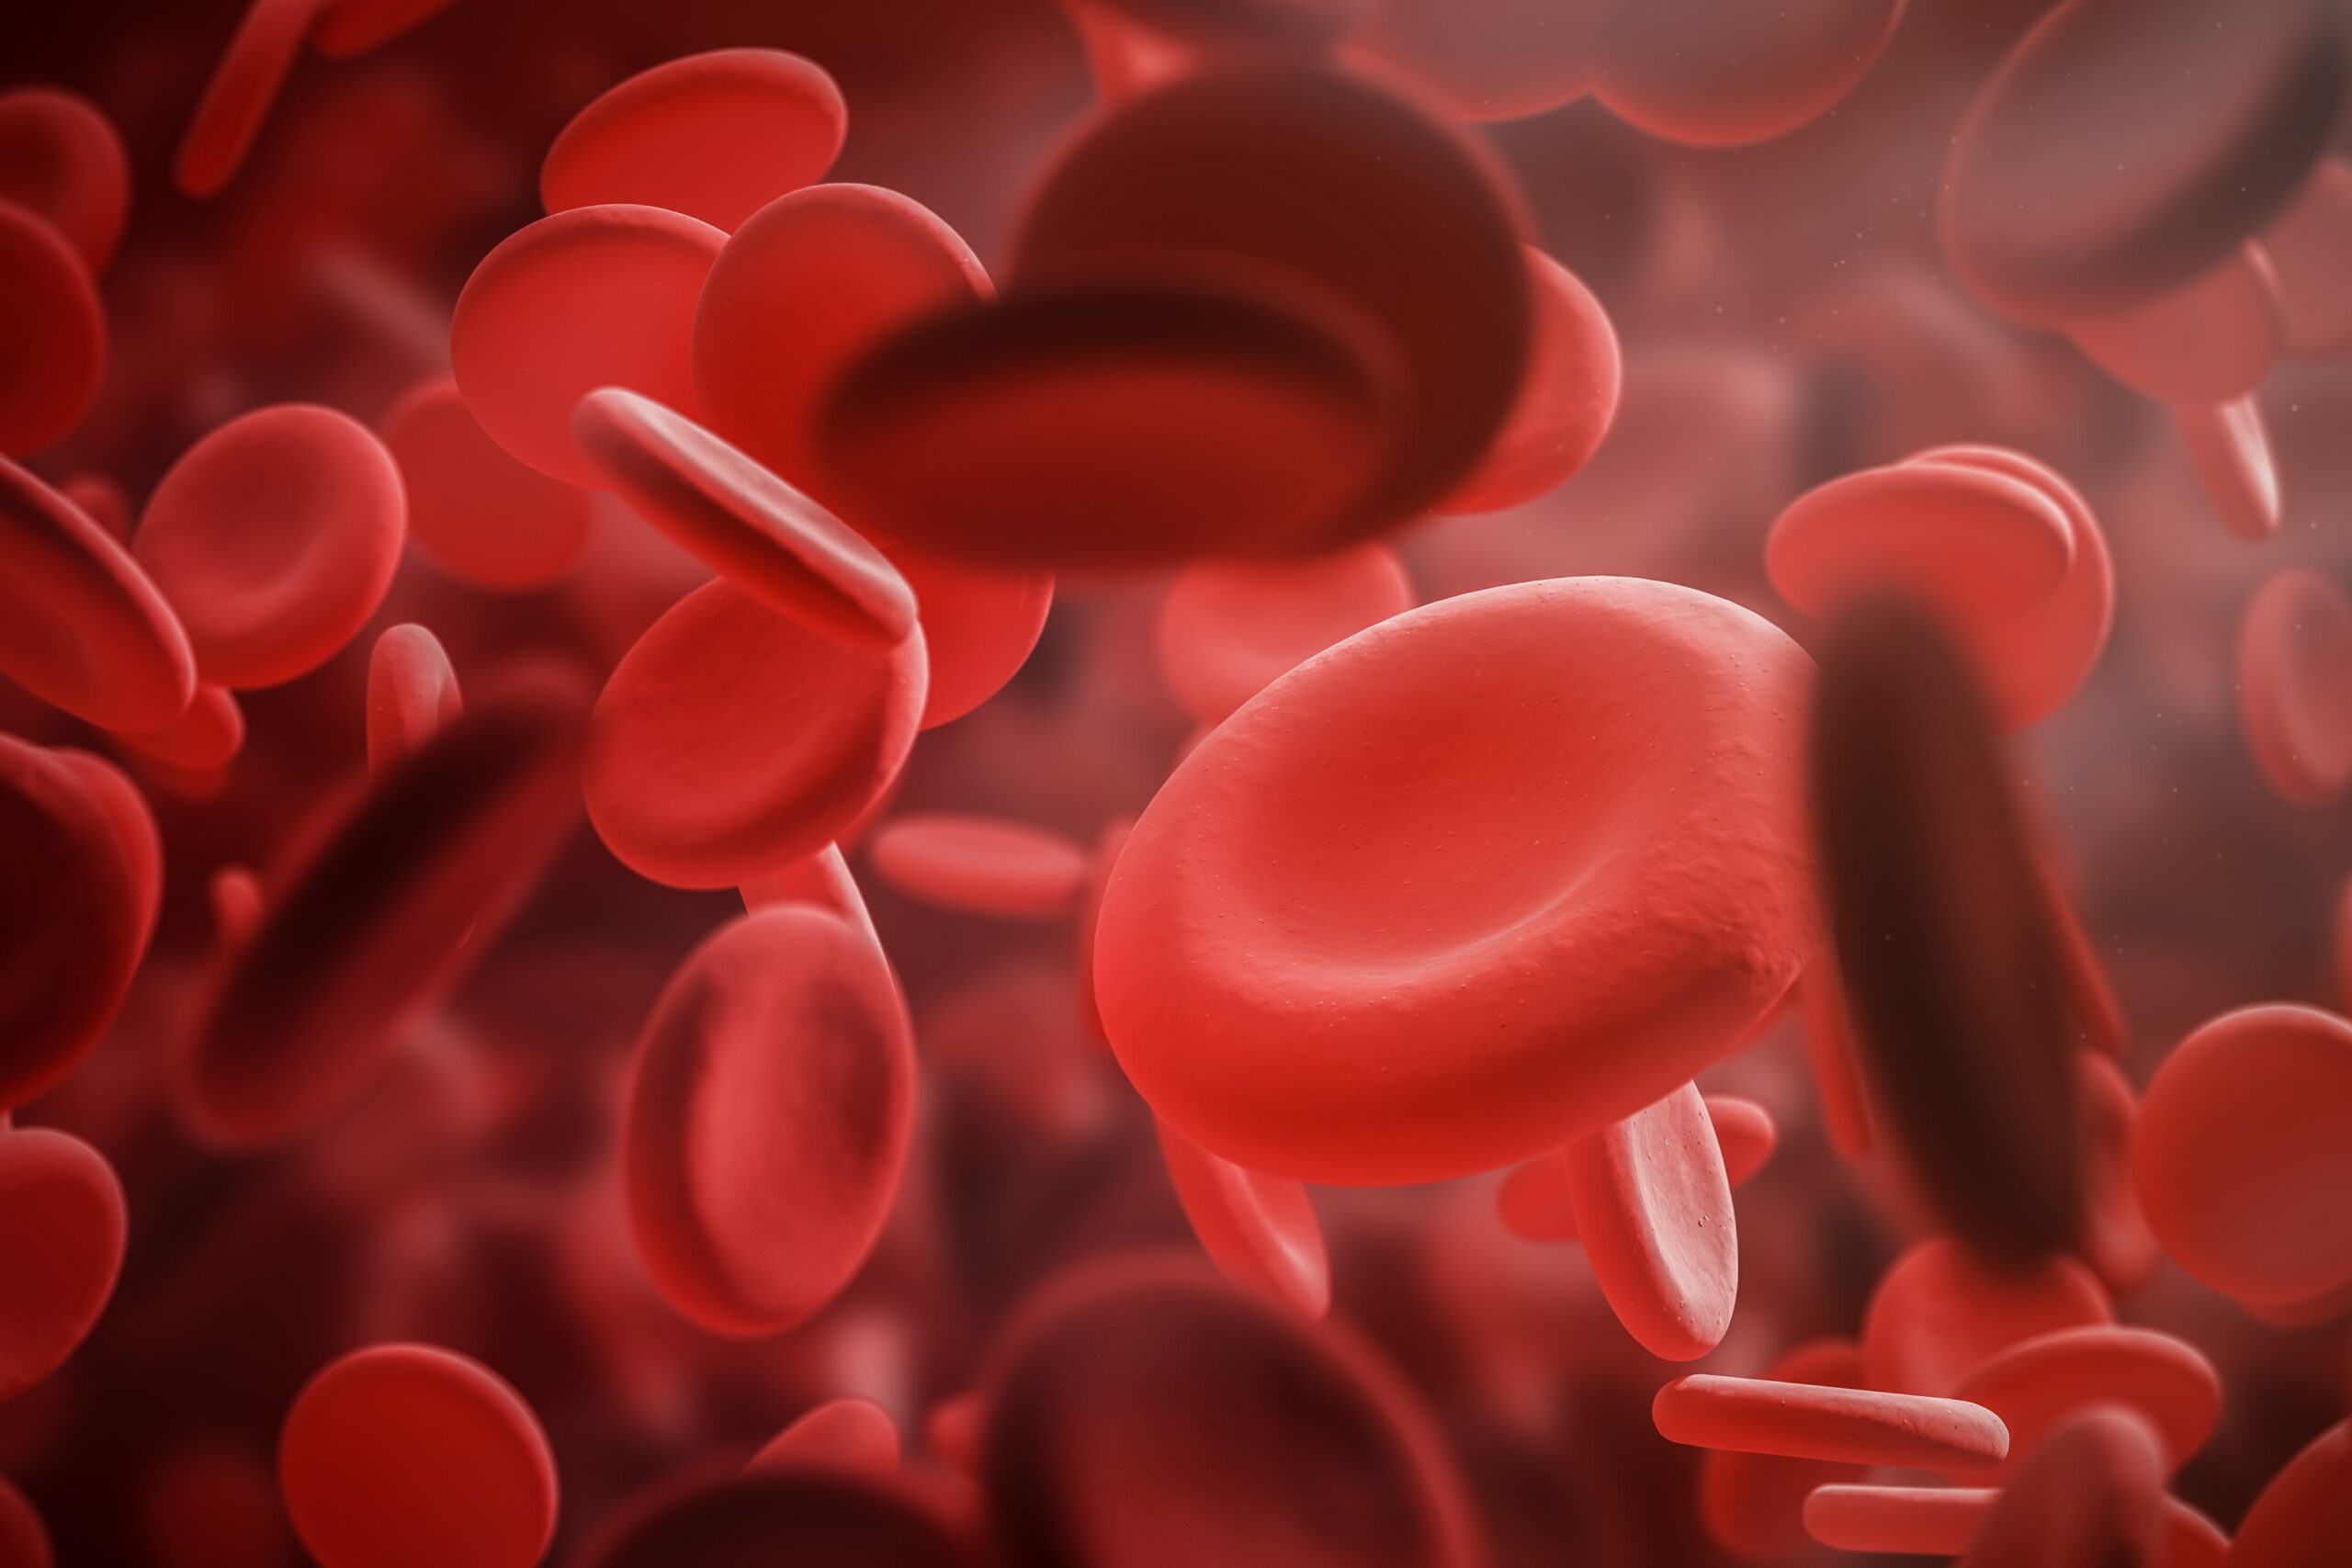 Graphic illustration of red blood cells